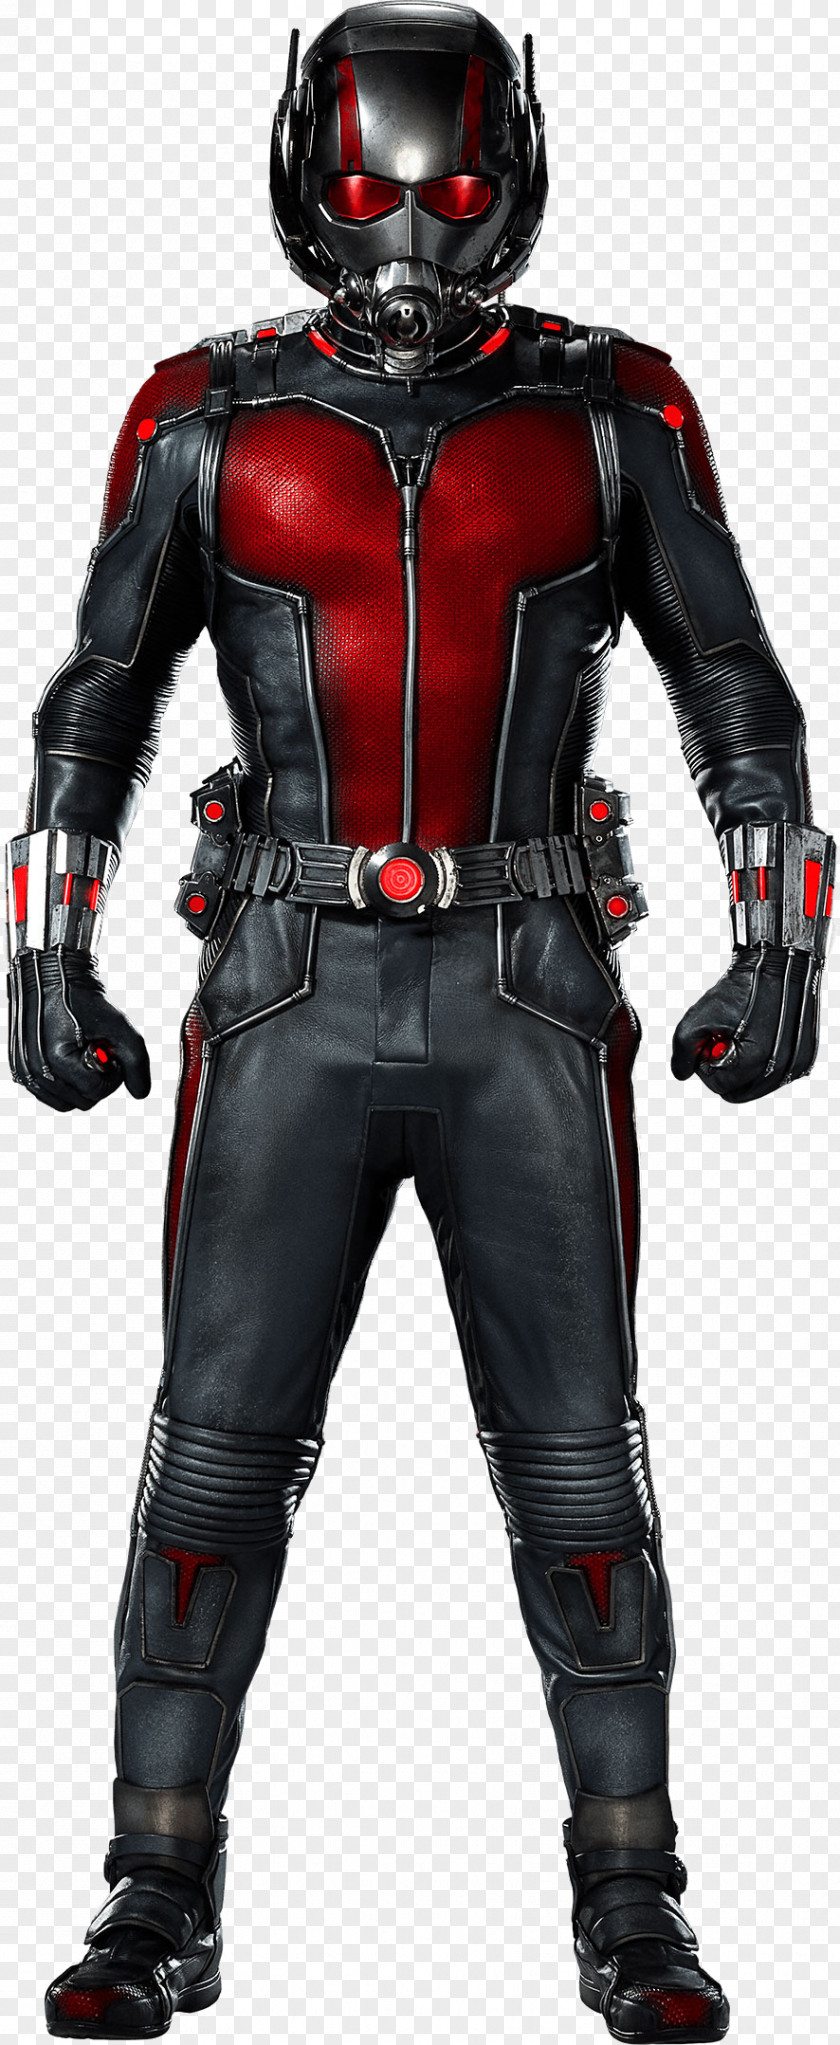 Human Torch Ant-Man Hank Pym Marvel Cinematic Universe Clip Art PNG